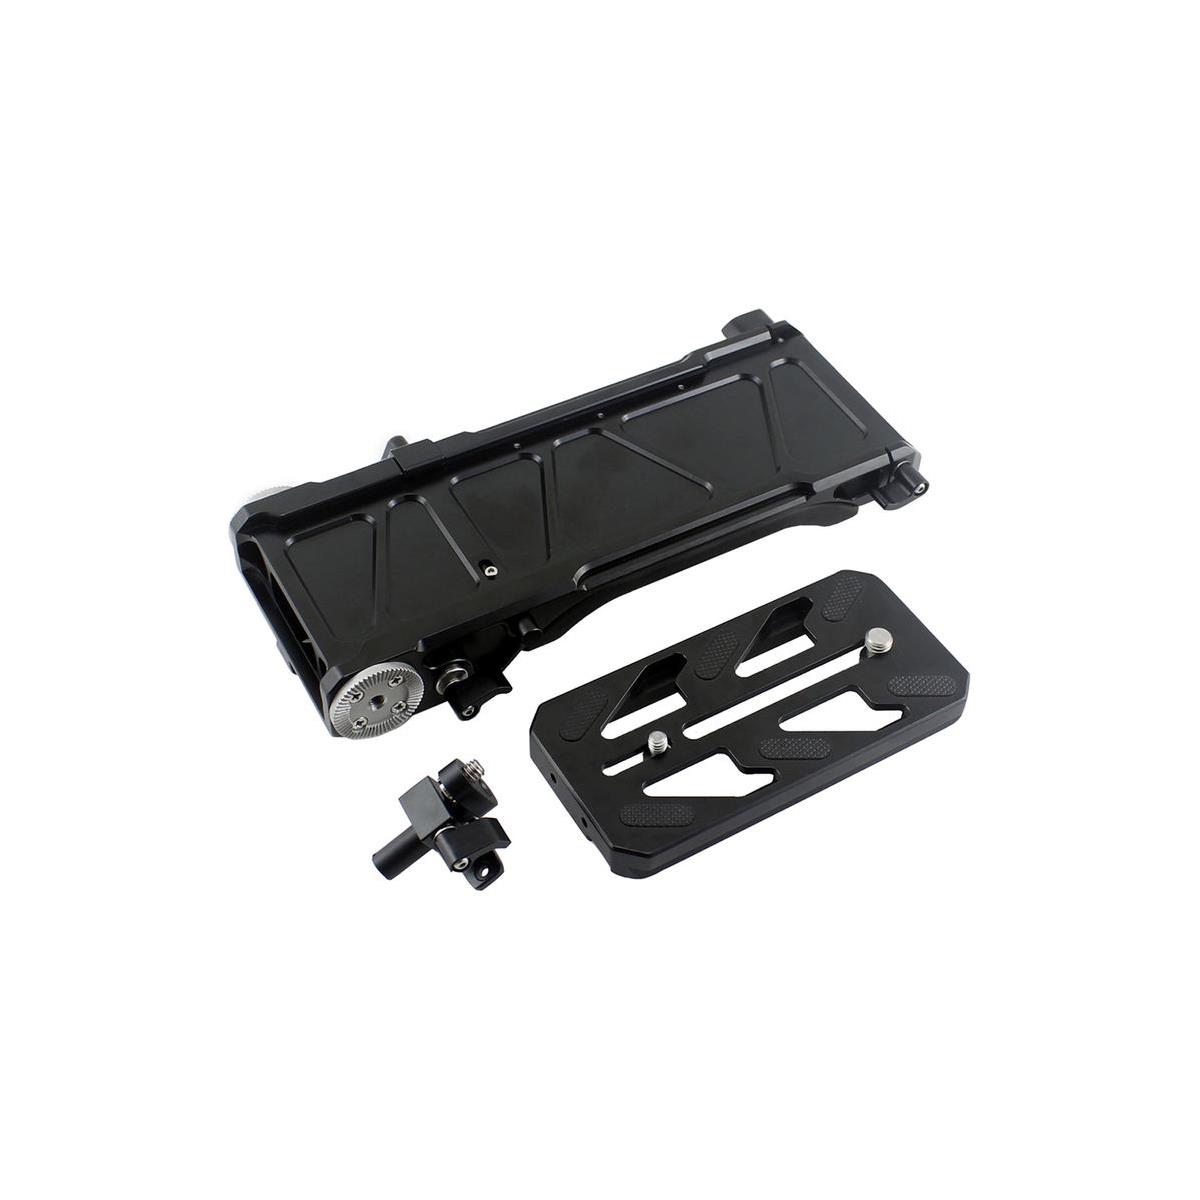 Image of Came-TV Base and Adapter Plate for Panasonic